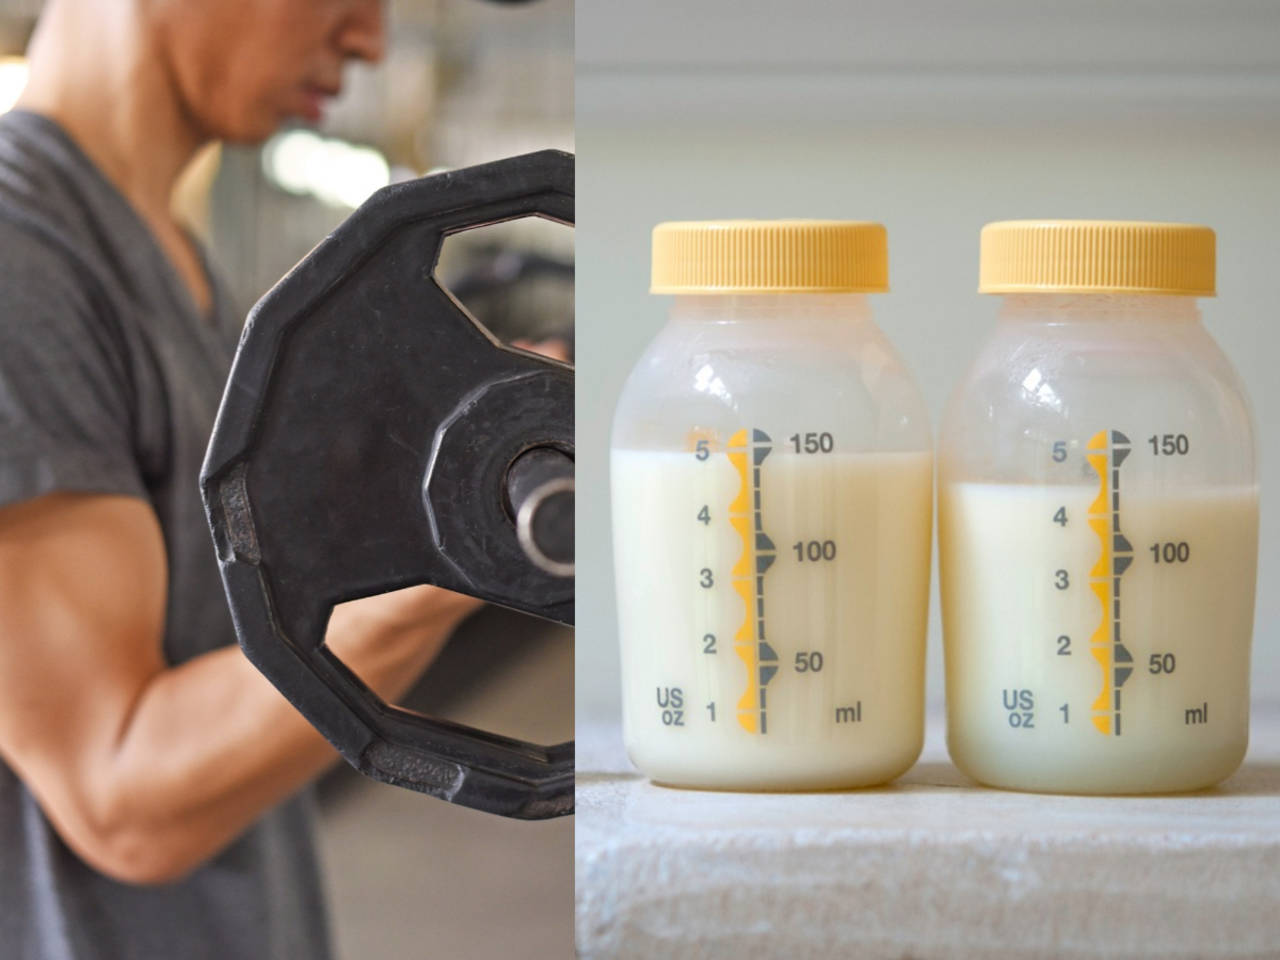 Shocking! Some men are now drinking breastmilk to build muscles photo pic